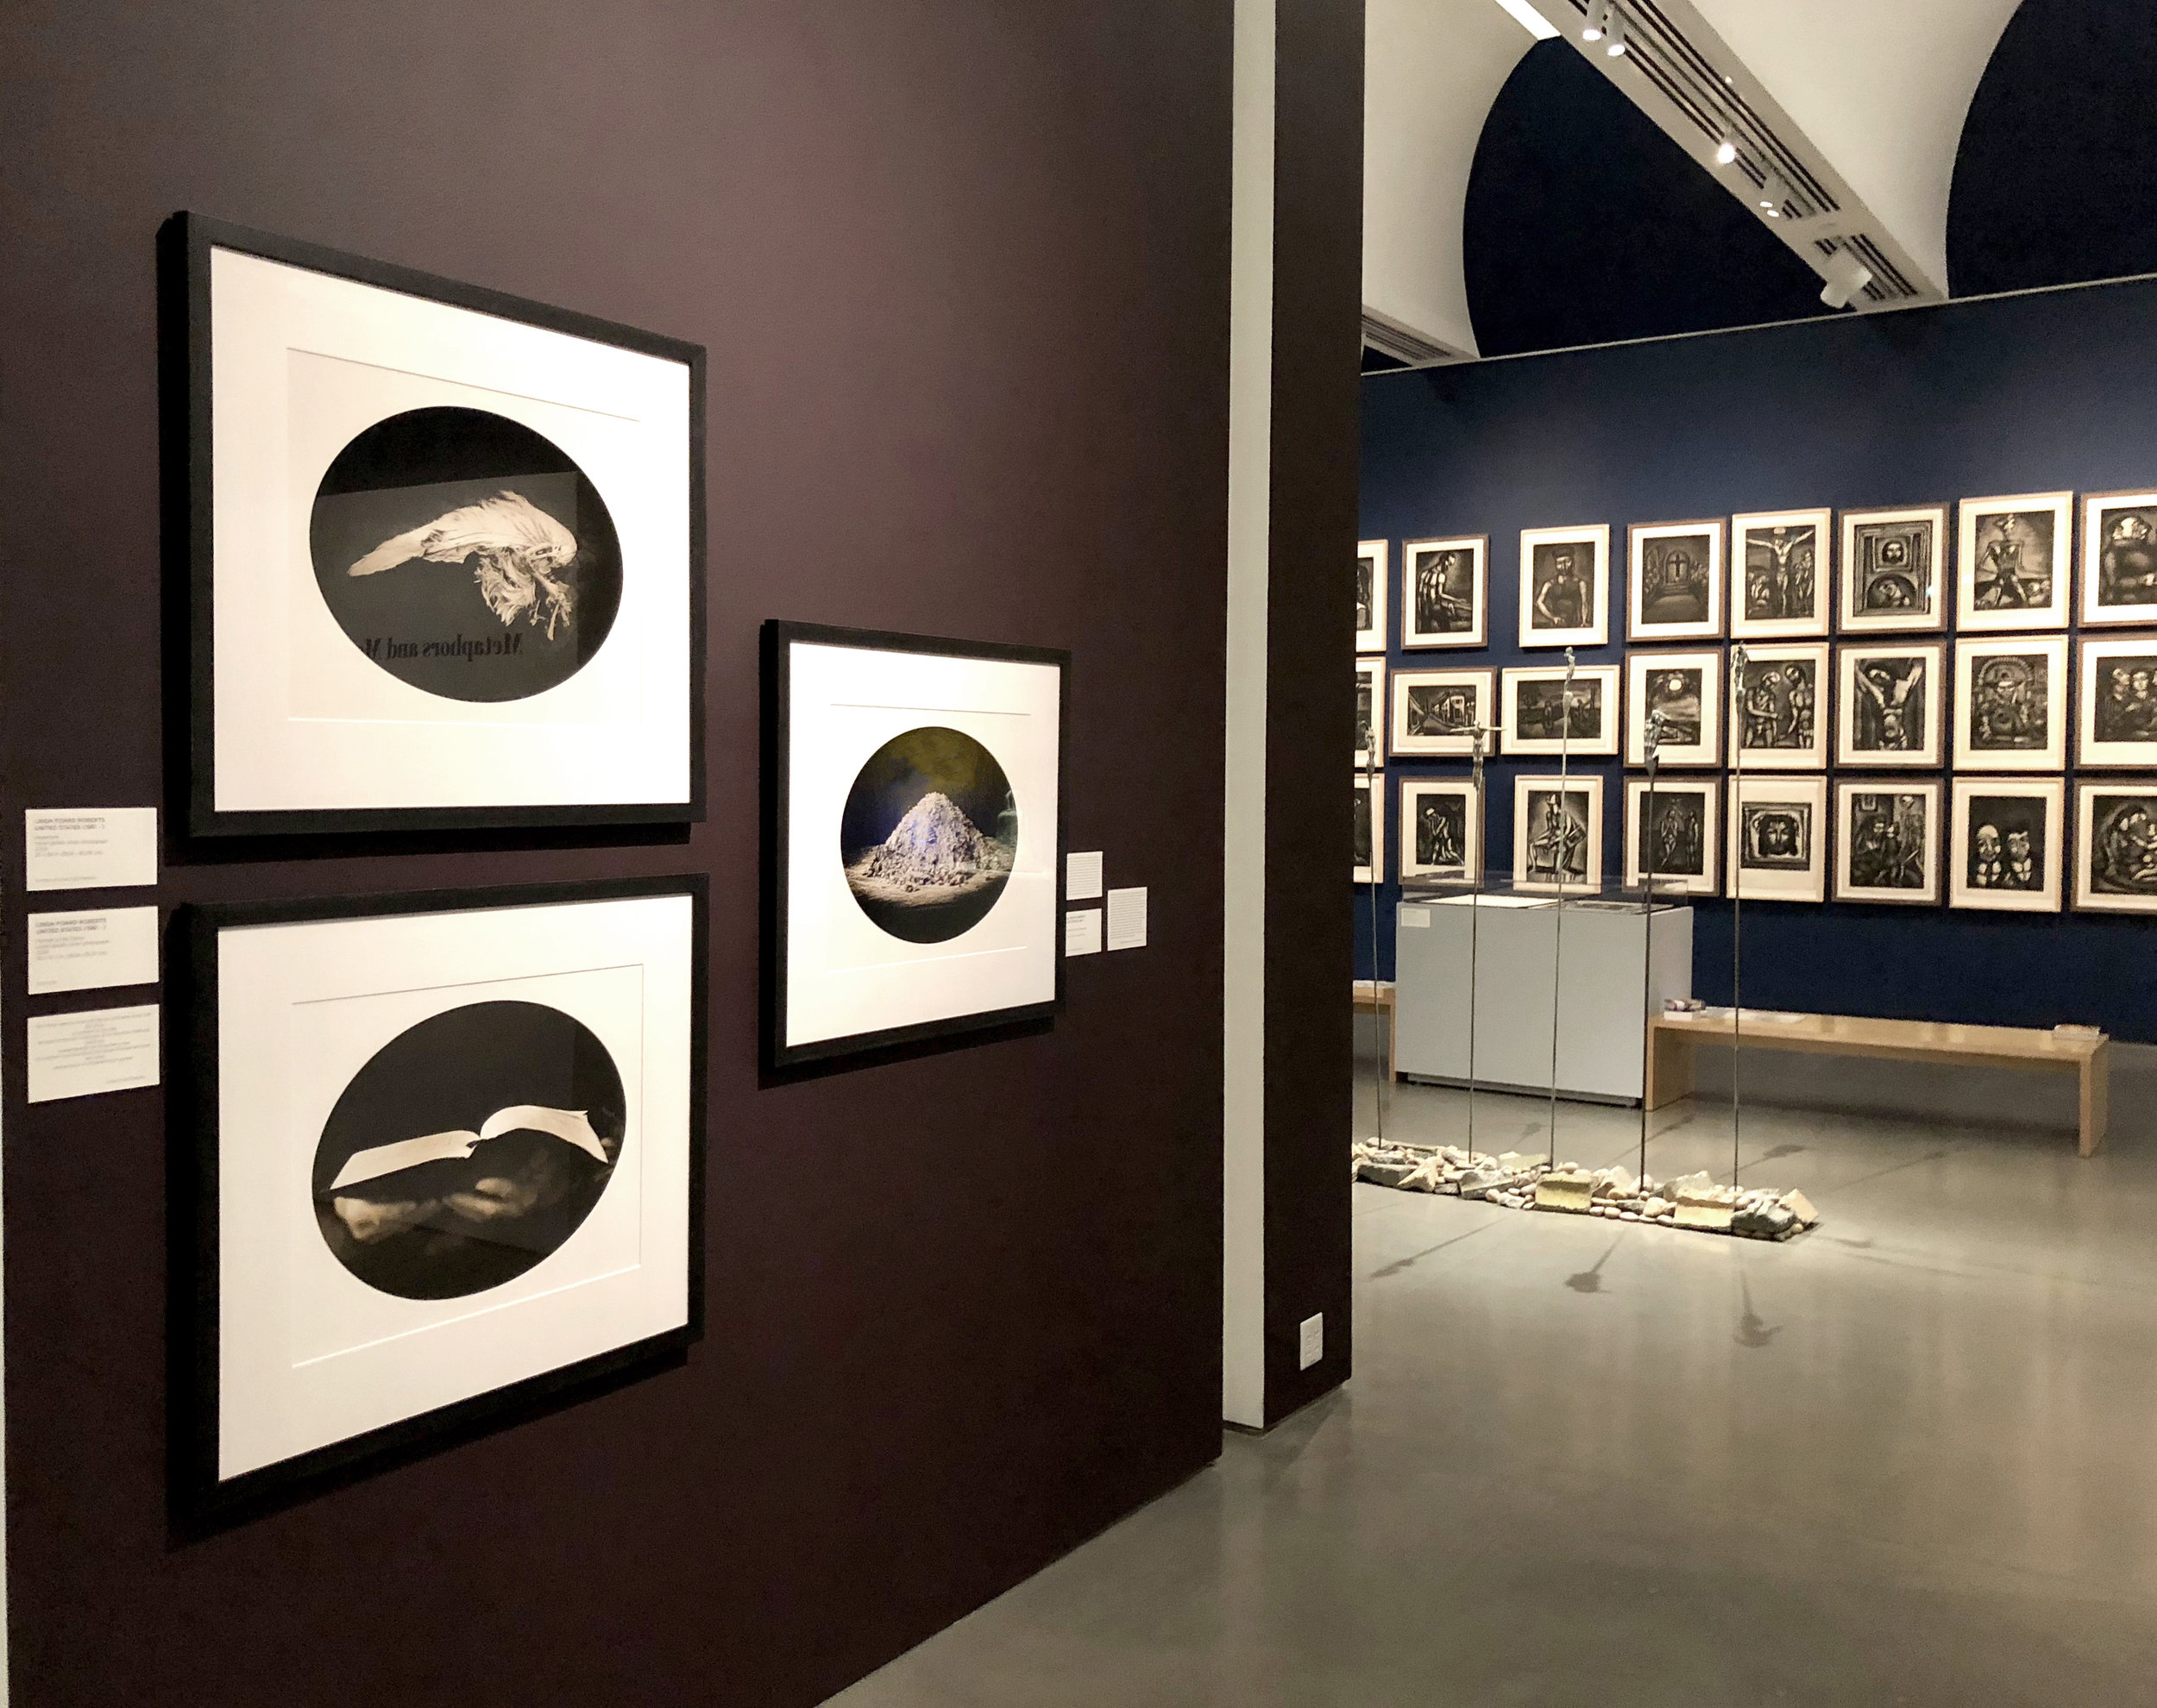  BECHTLER MUSEUM OF ART  WRESTLING THE ANGEL EXHIBITION  WITH ANDY WARHOL, MARC CHAGALL, GEORGES ROUAULT, JEAN TINGUELY AND OTHERS, 2018  